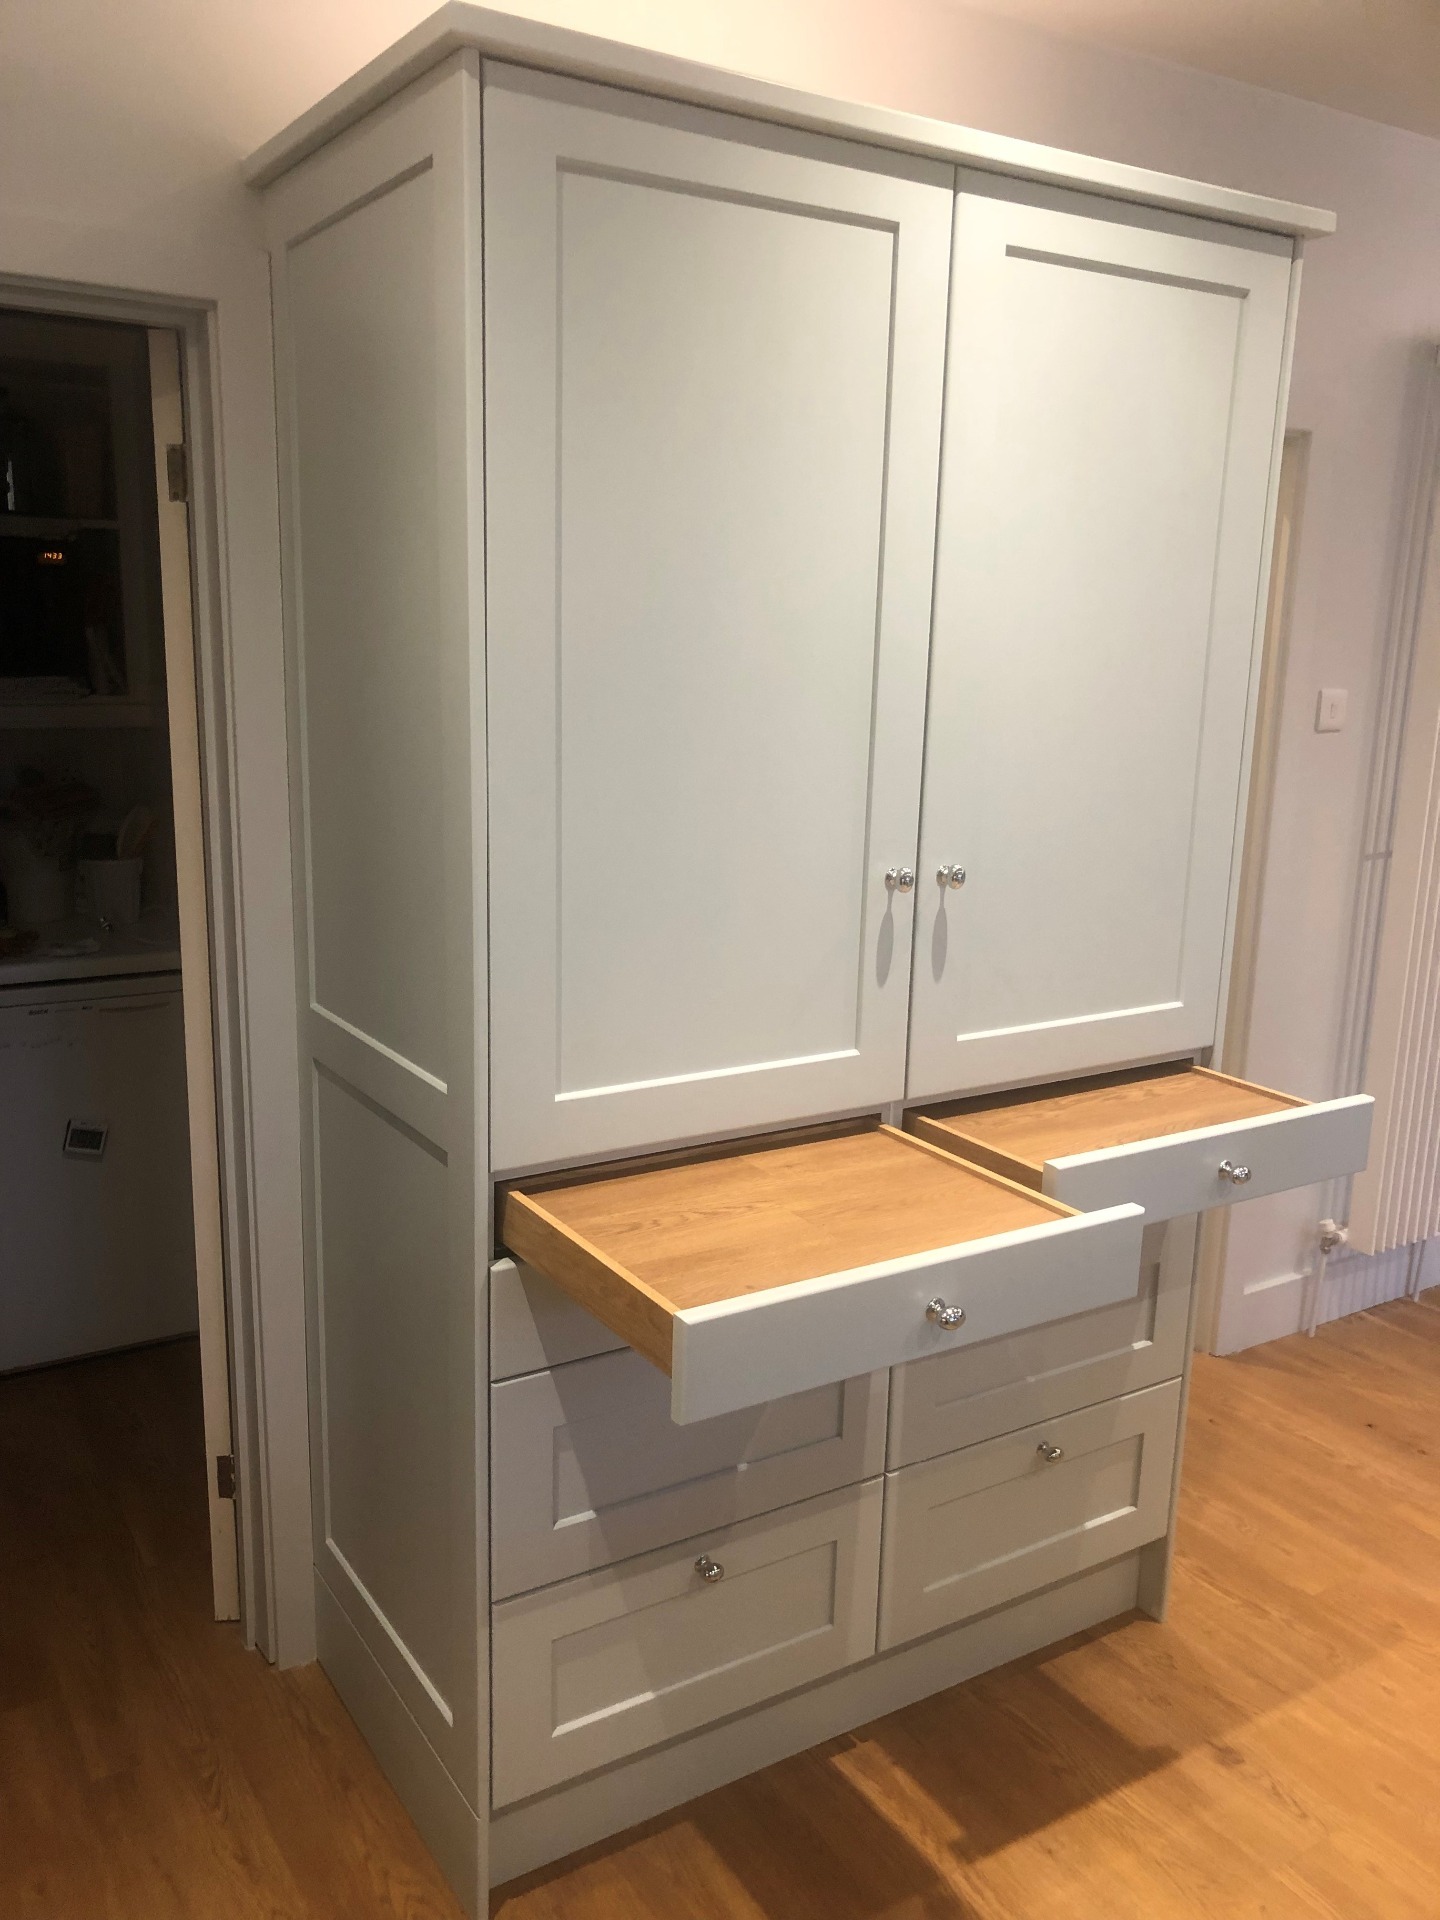 Bespoke pantry with pull-outs